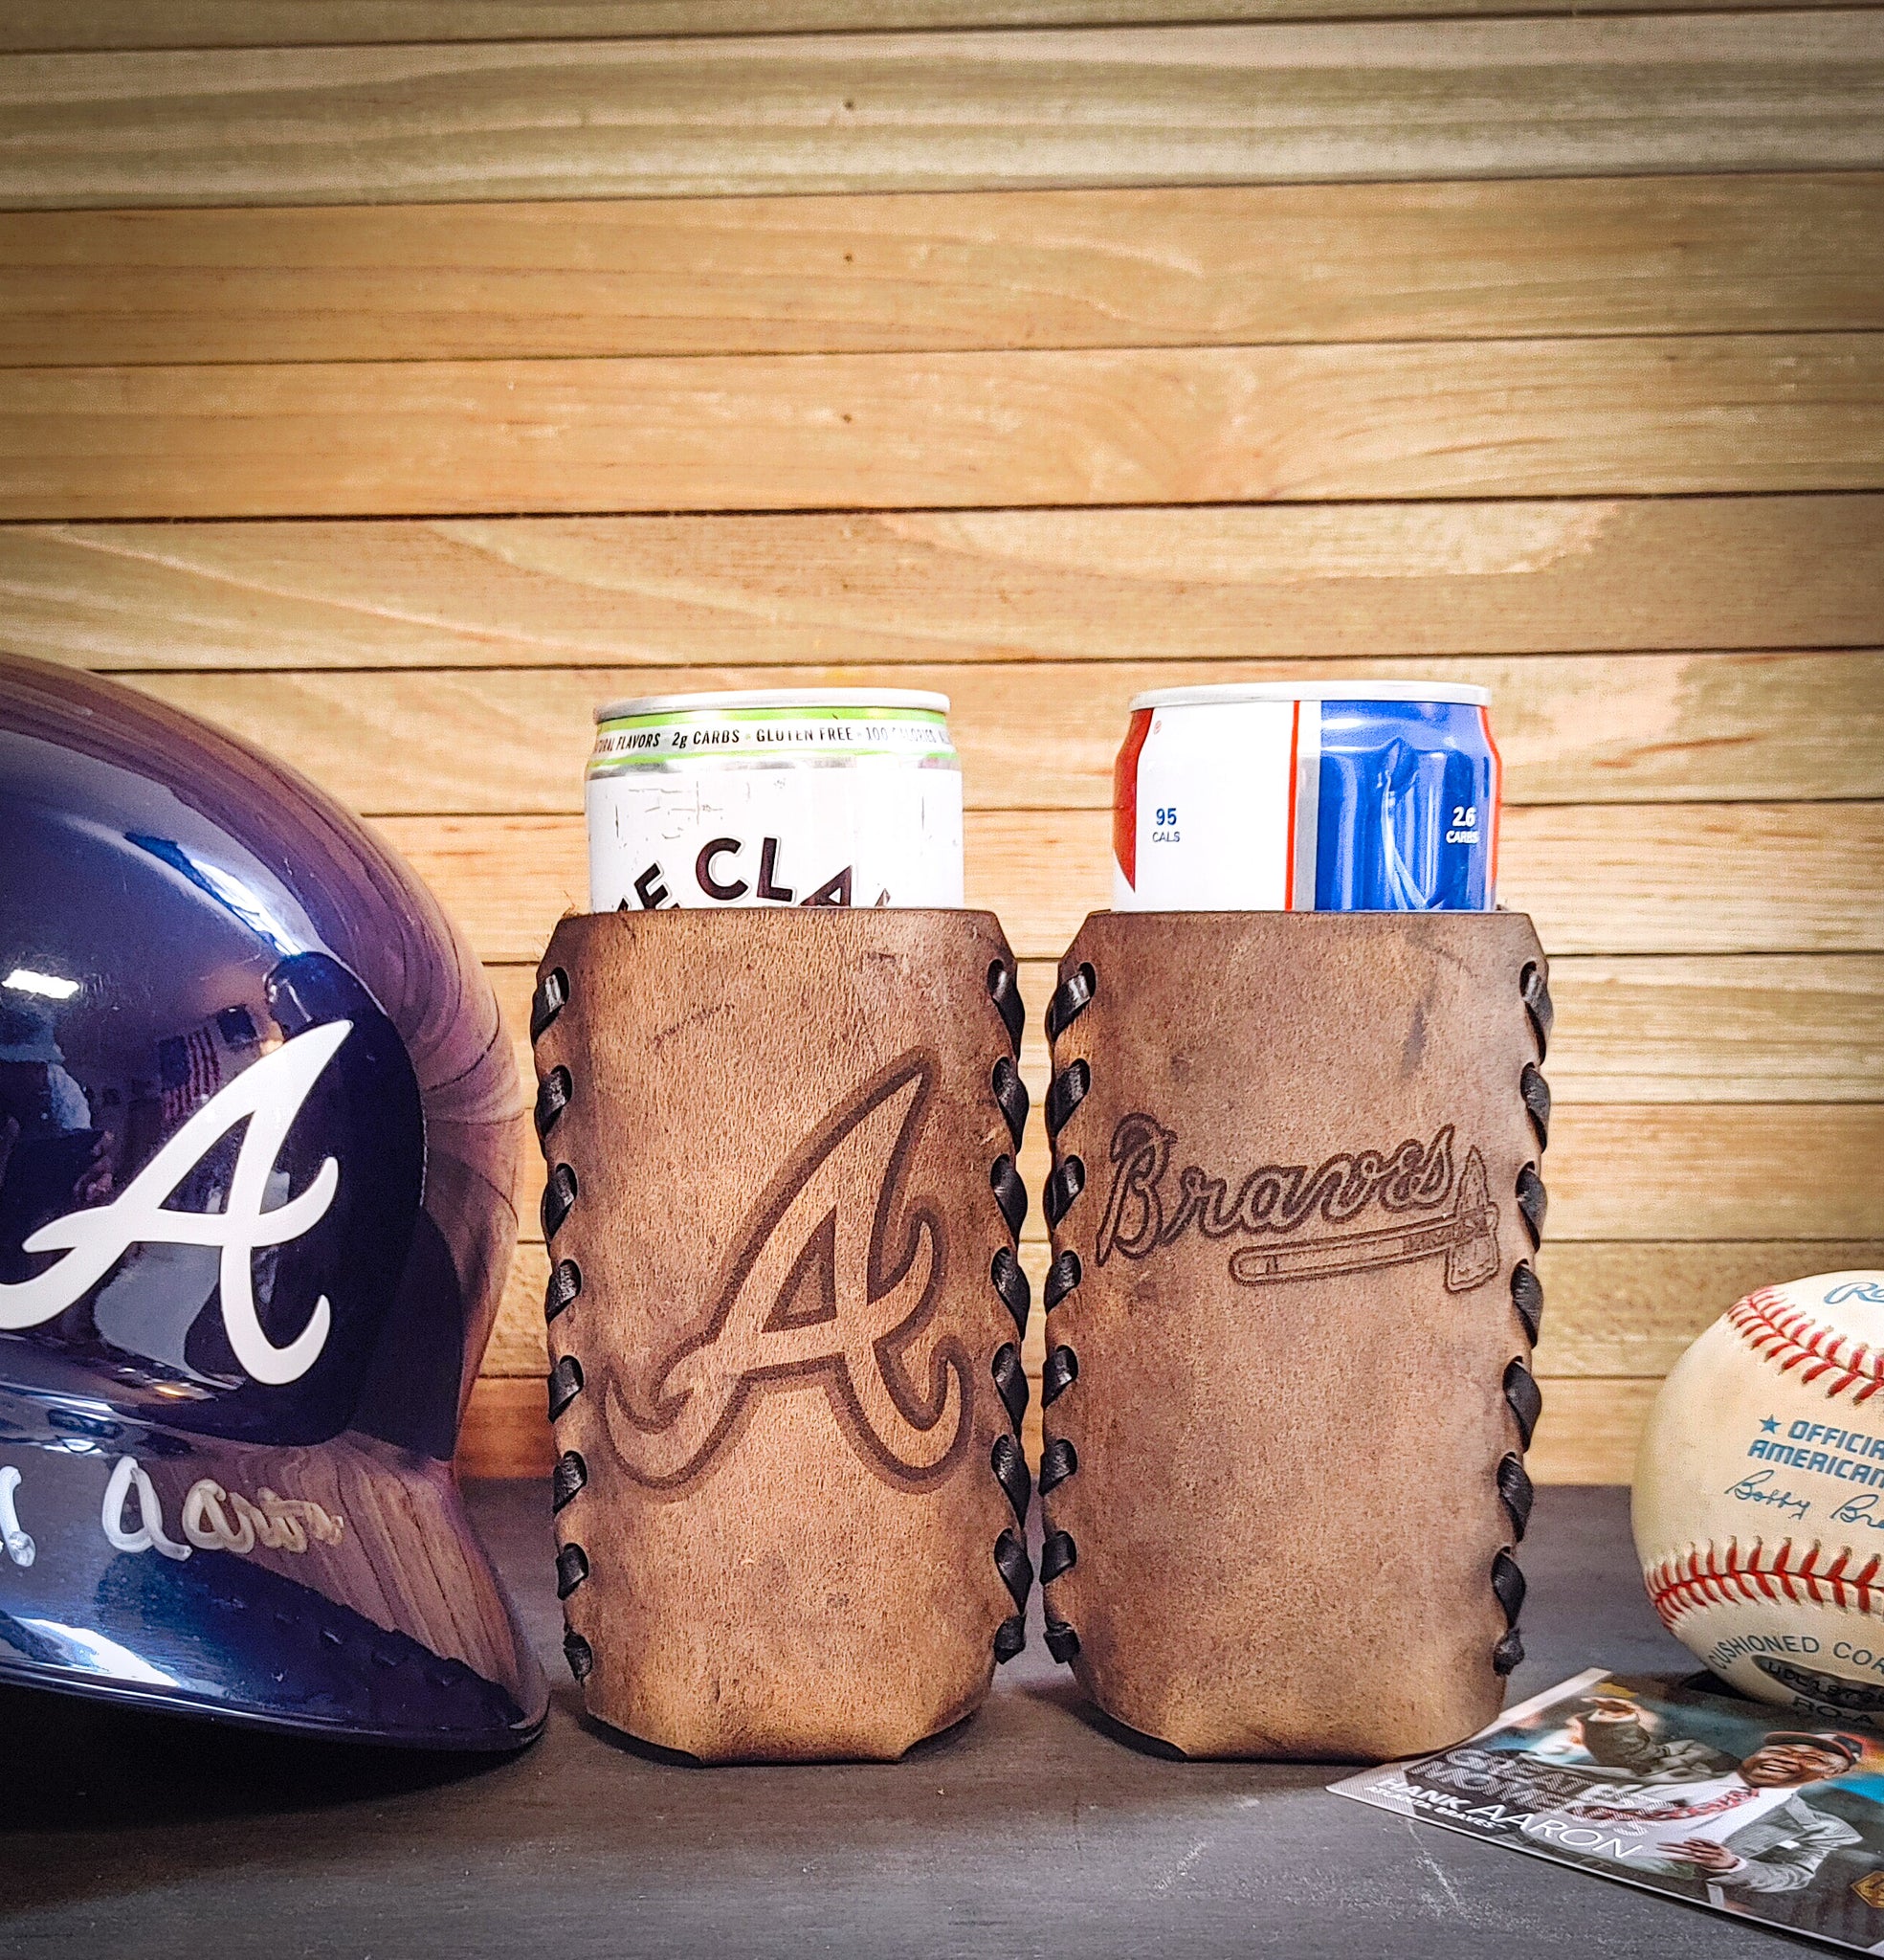 Atlanta Braves Can Coozie